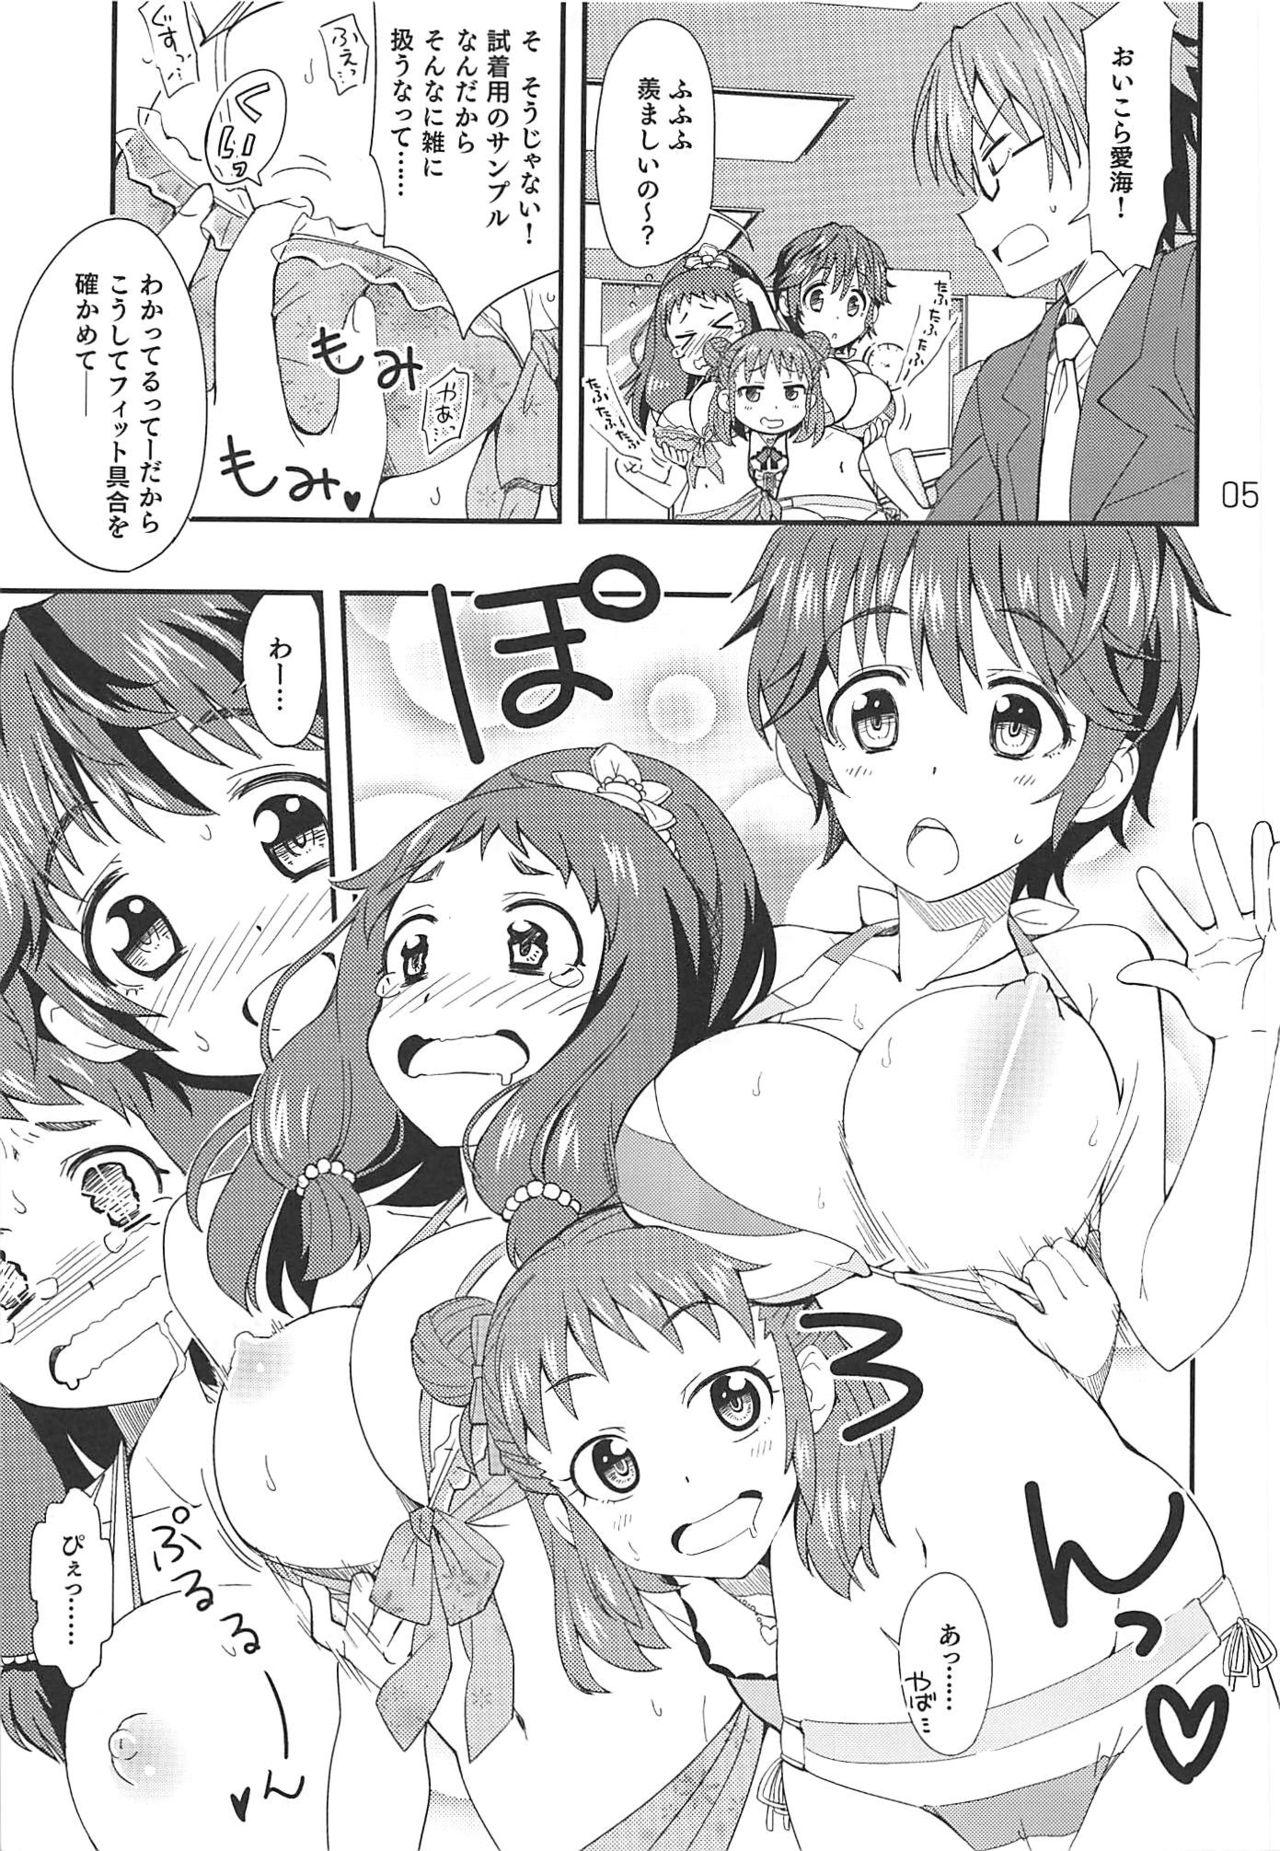 Ink Wotometicm@ster - The idolmaster Tinder - Page 4